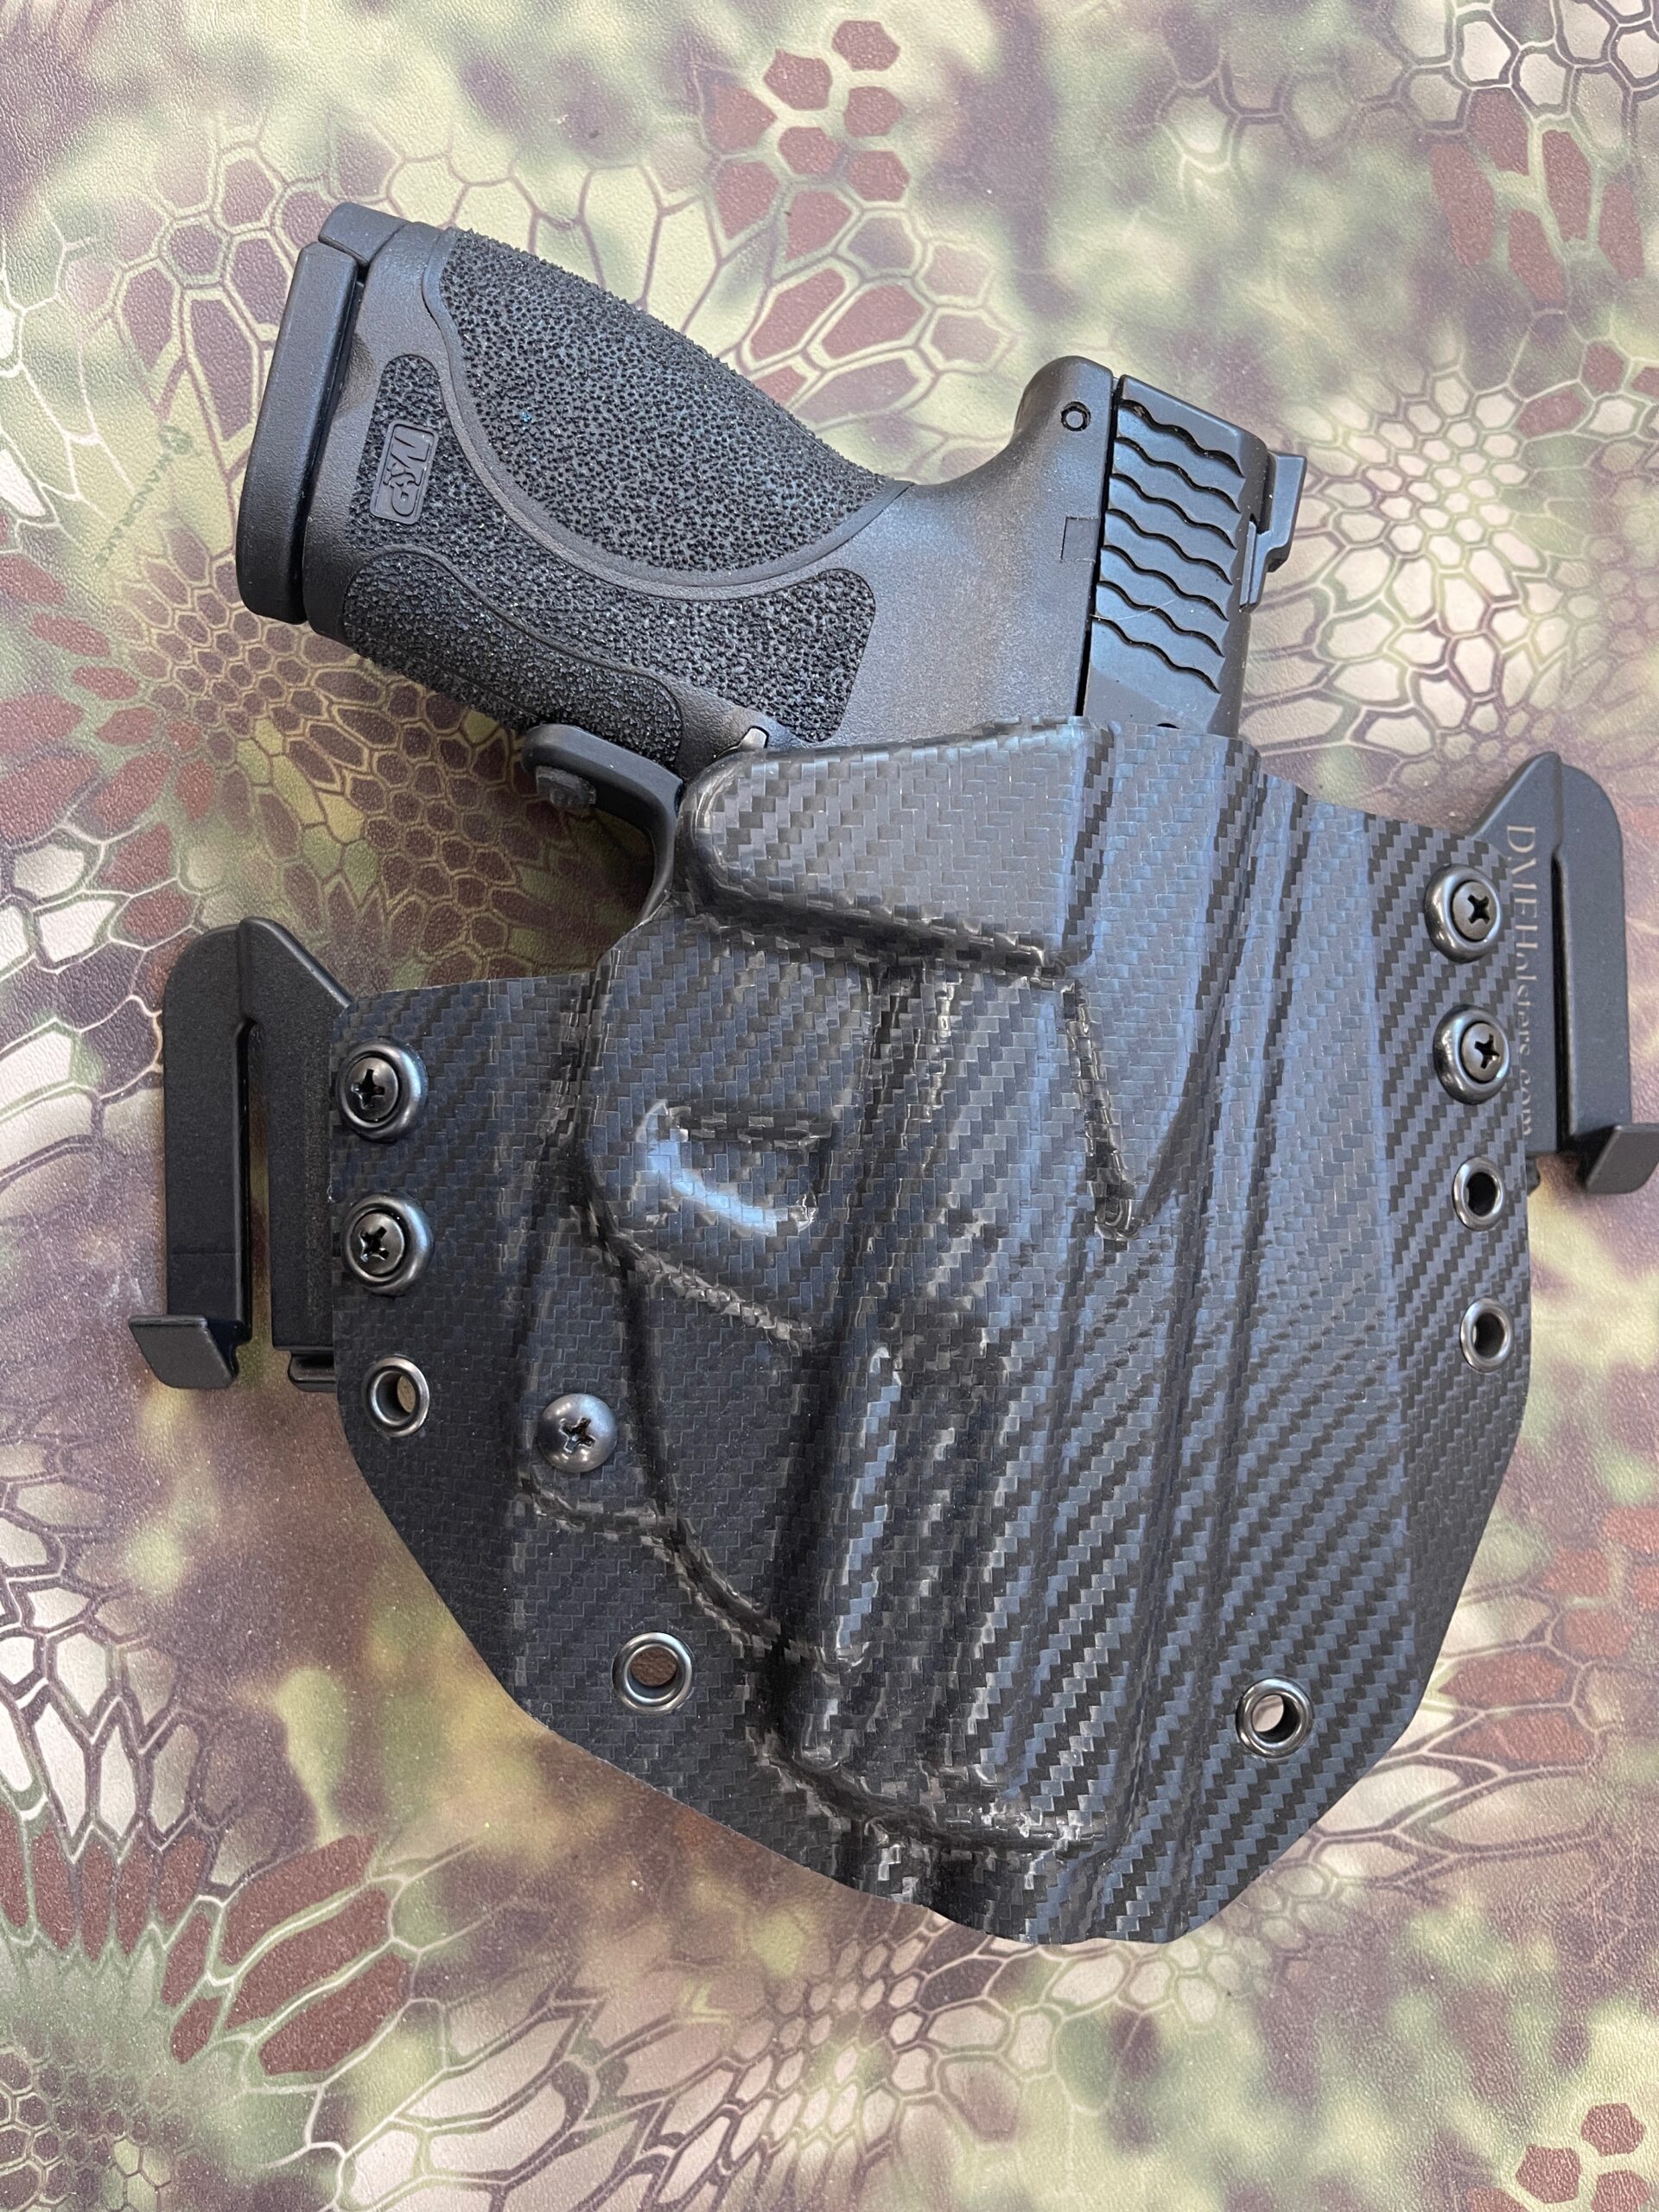 OWB belt carry holster for S&W M&P Shield 9mm,40 cal M2.0 pistol. Right  Handed